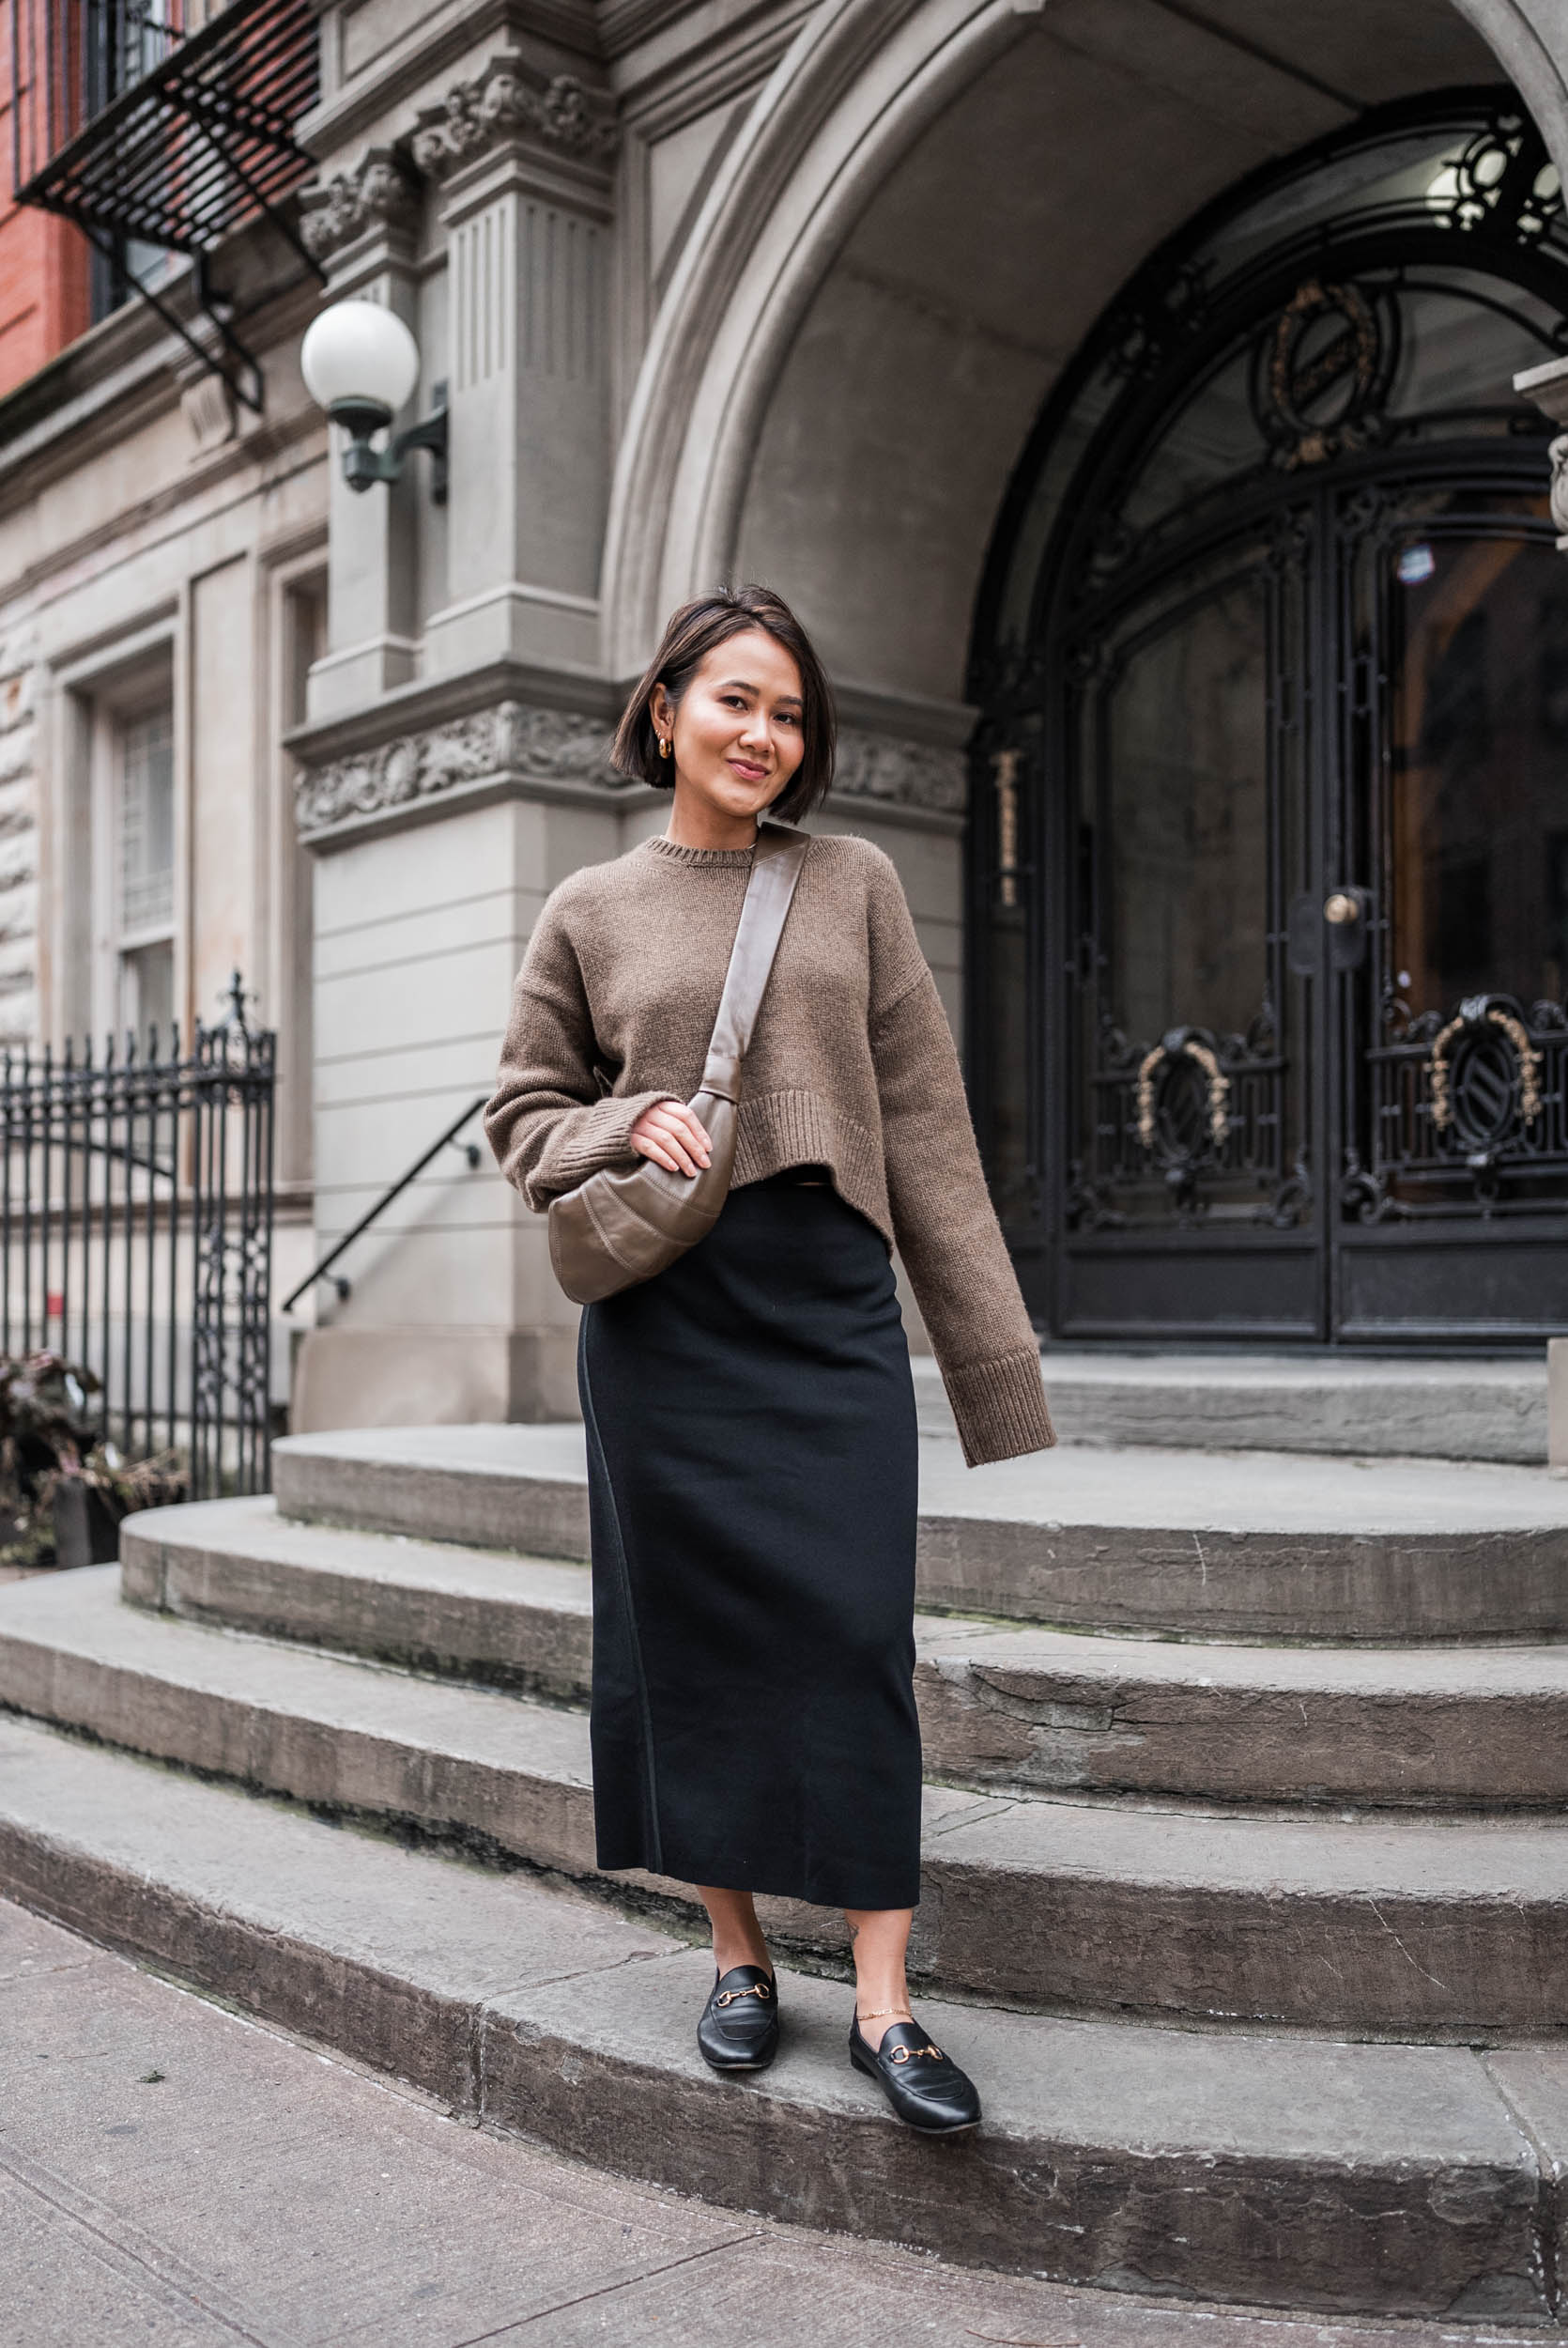 Style-Senses-An-Trieu_Gucci-Lemaire-Croissant-Bag-Old-Celine-sweater-COS-skirt-Aurate-NY-hoops